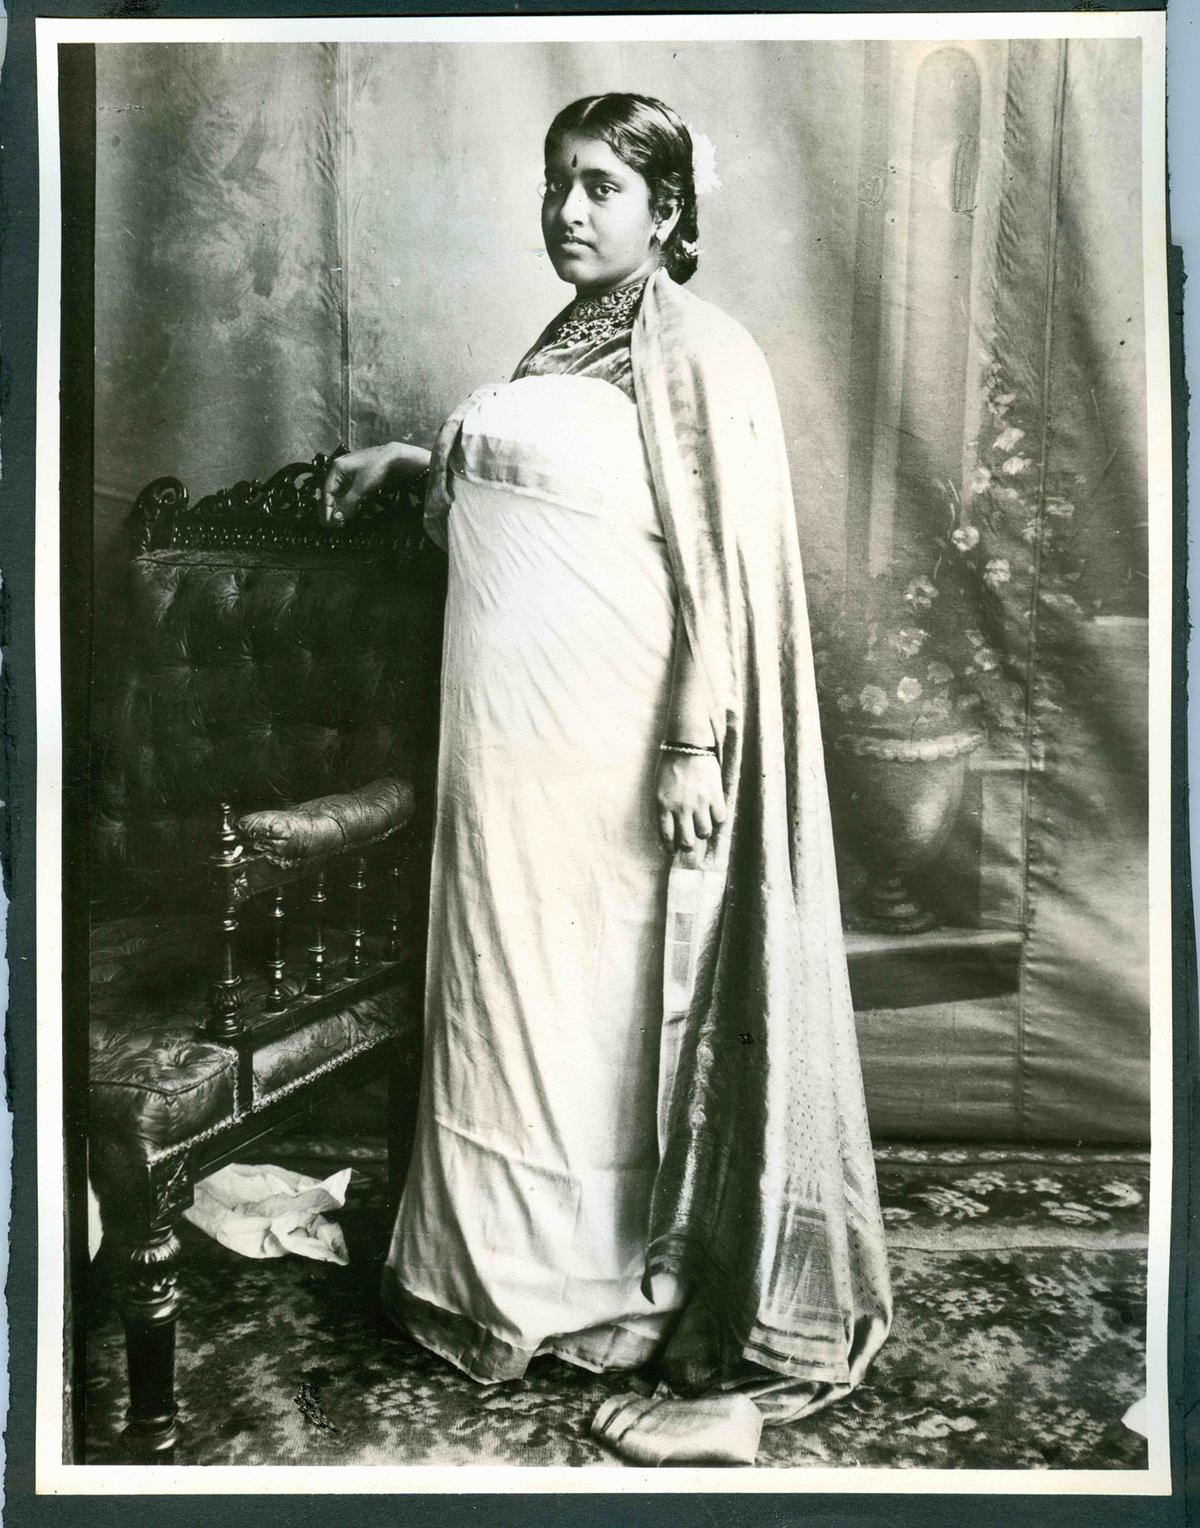 A studio photograph of the Maharani through the second half of the 1920s.